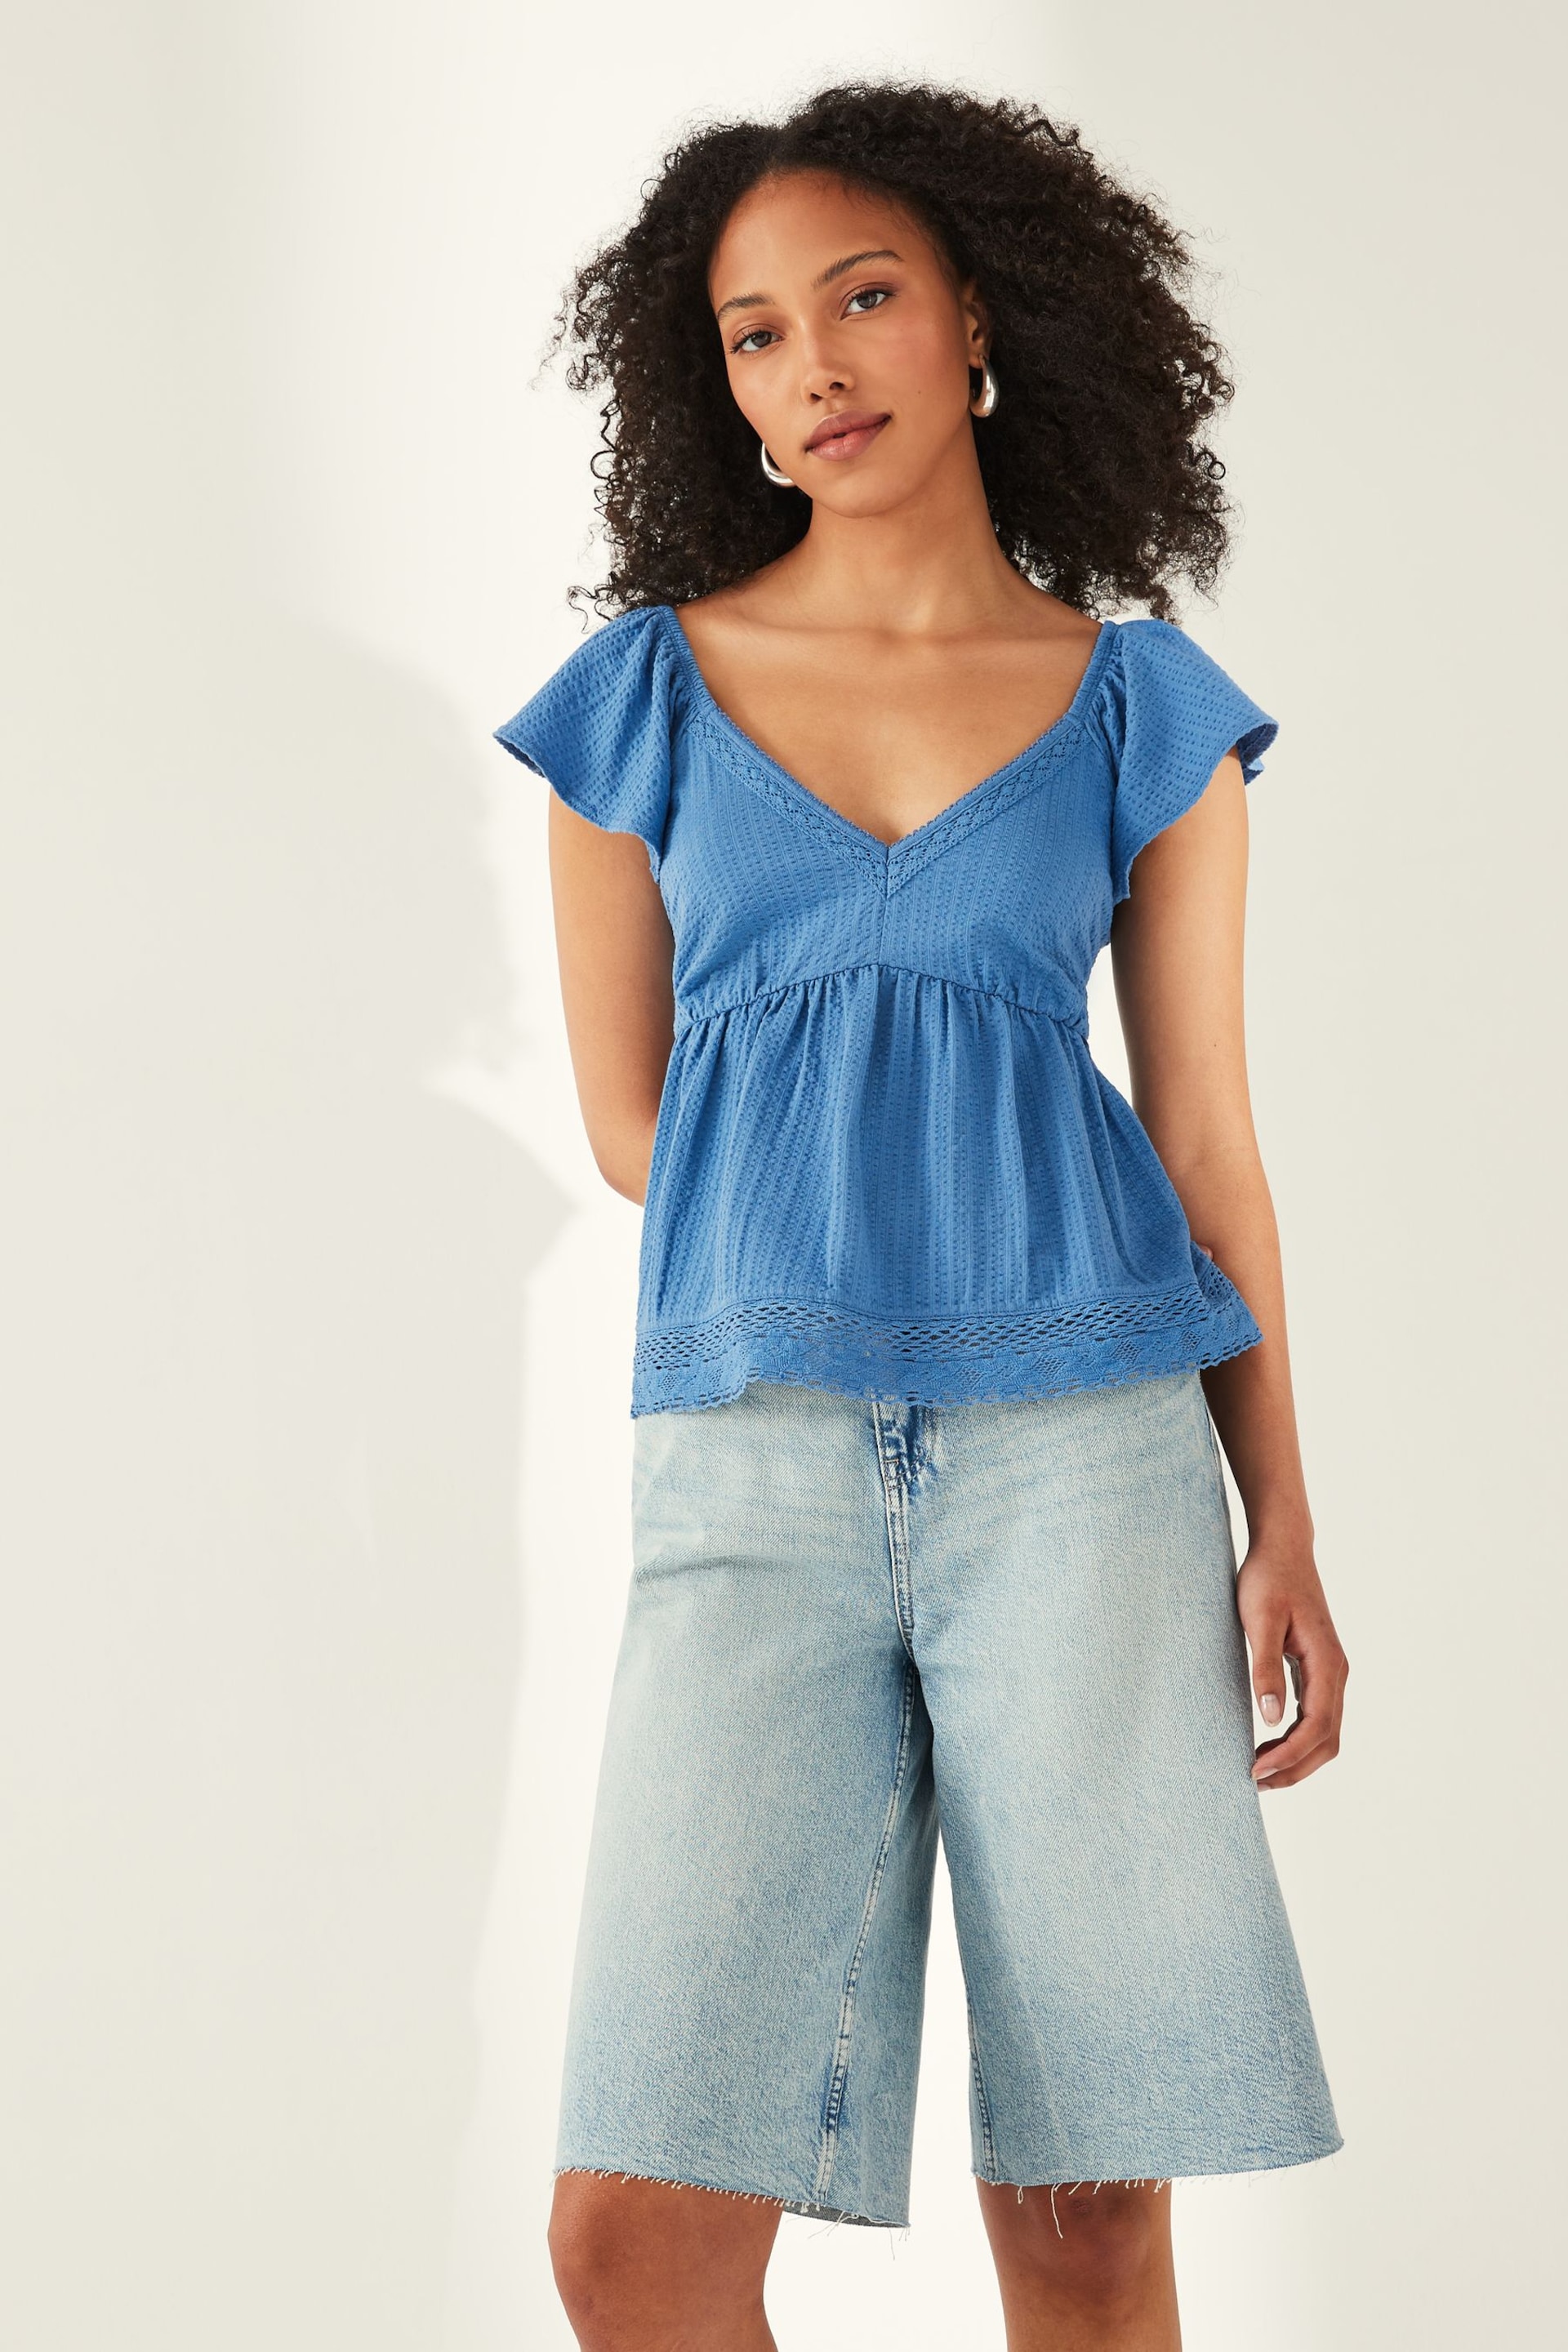 Blue Lace Trim Flutter Sleeve Summer Holiday Top - Image 1 of 5